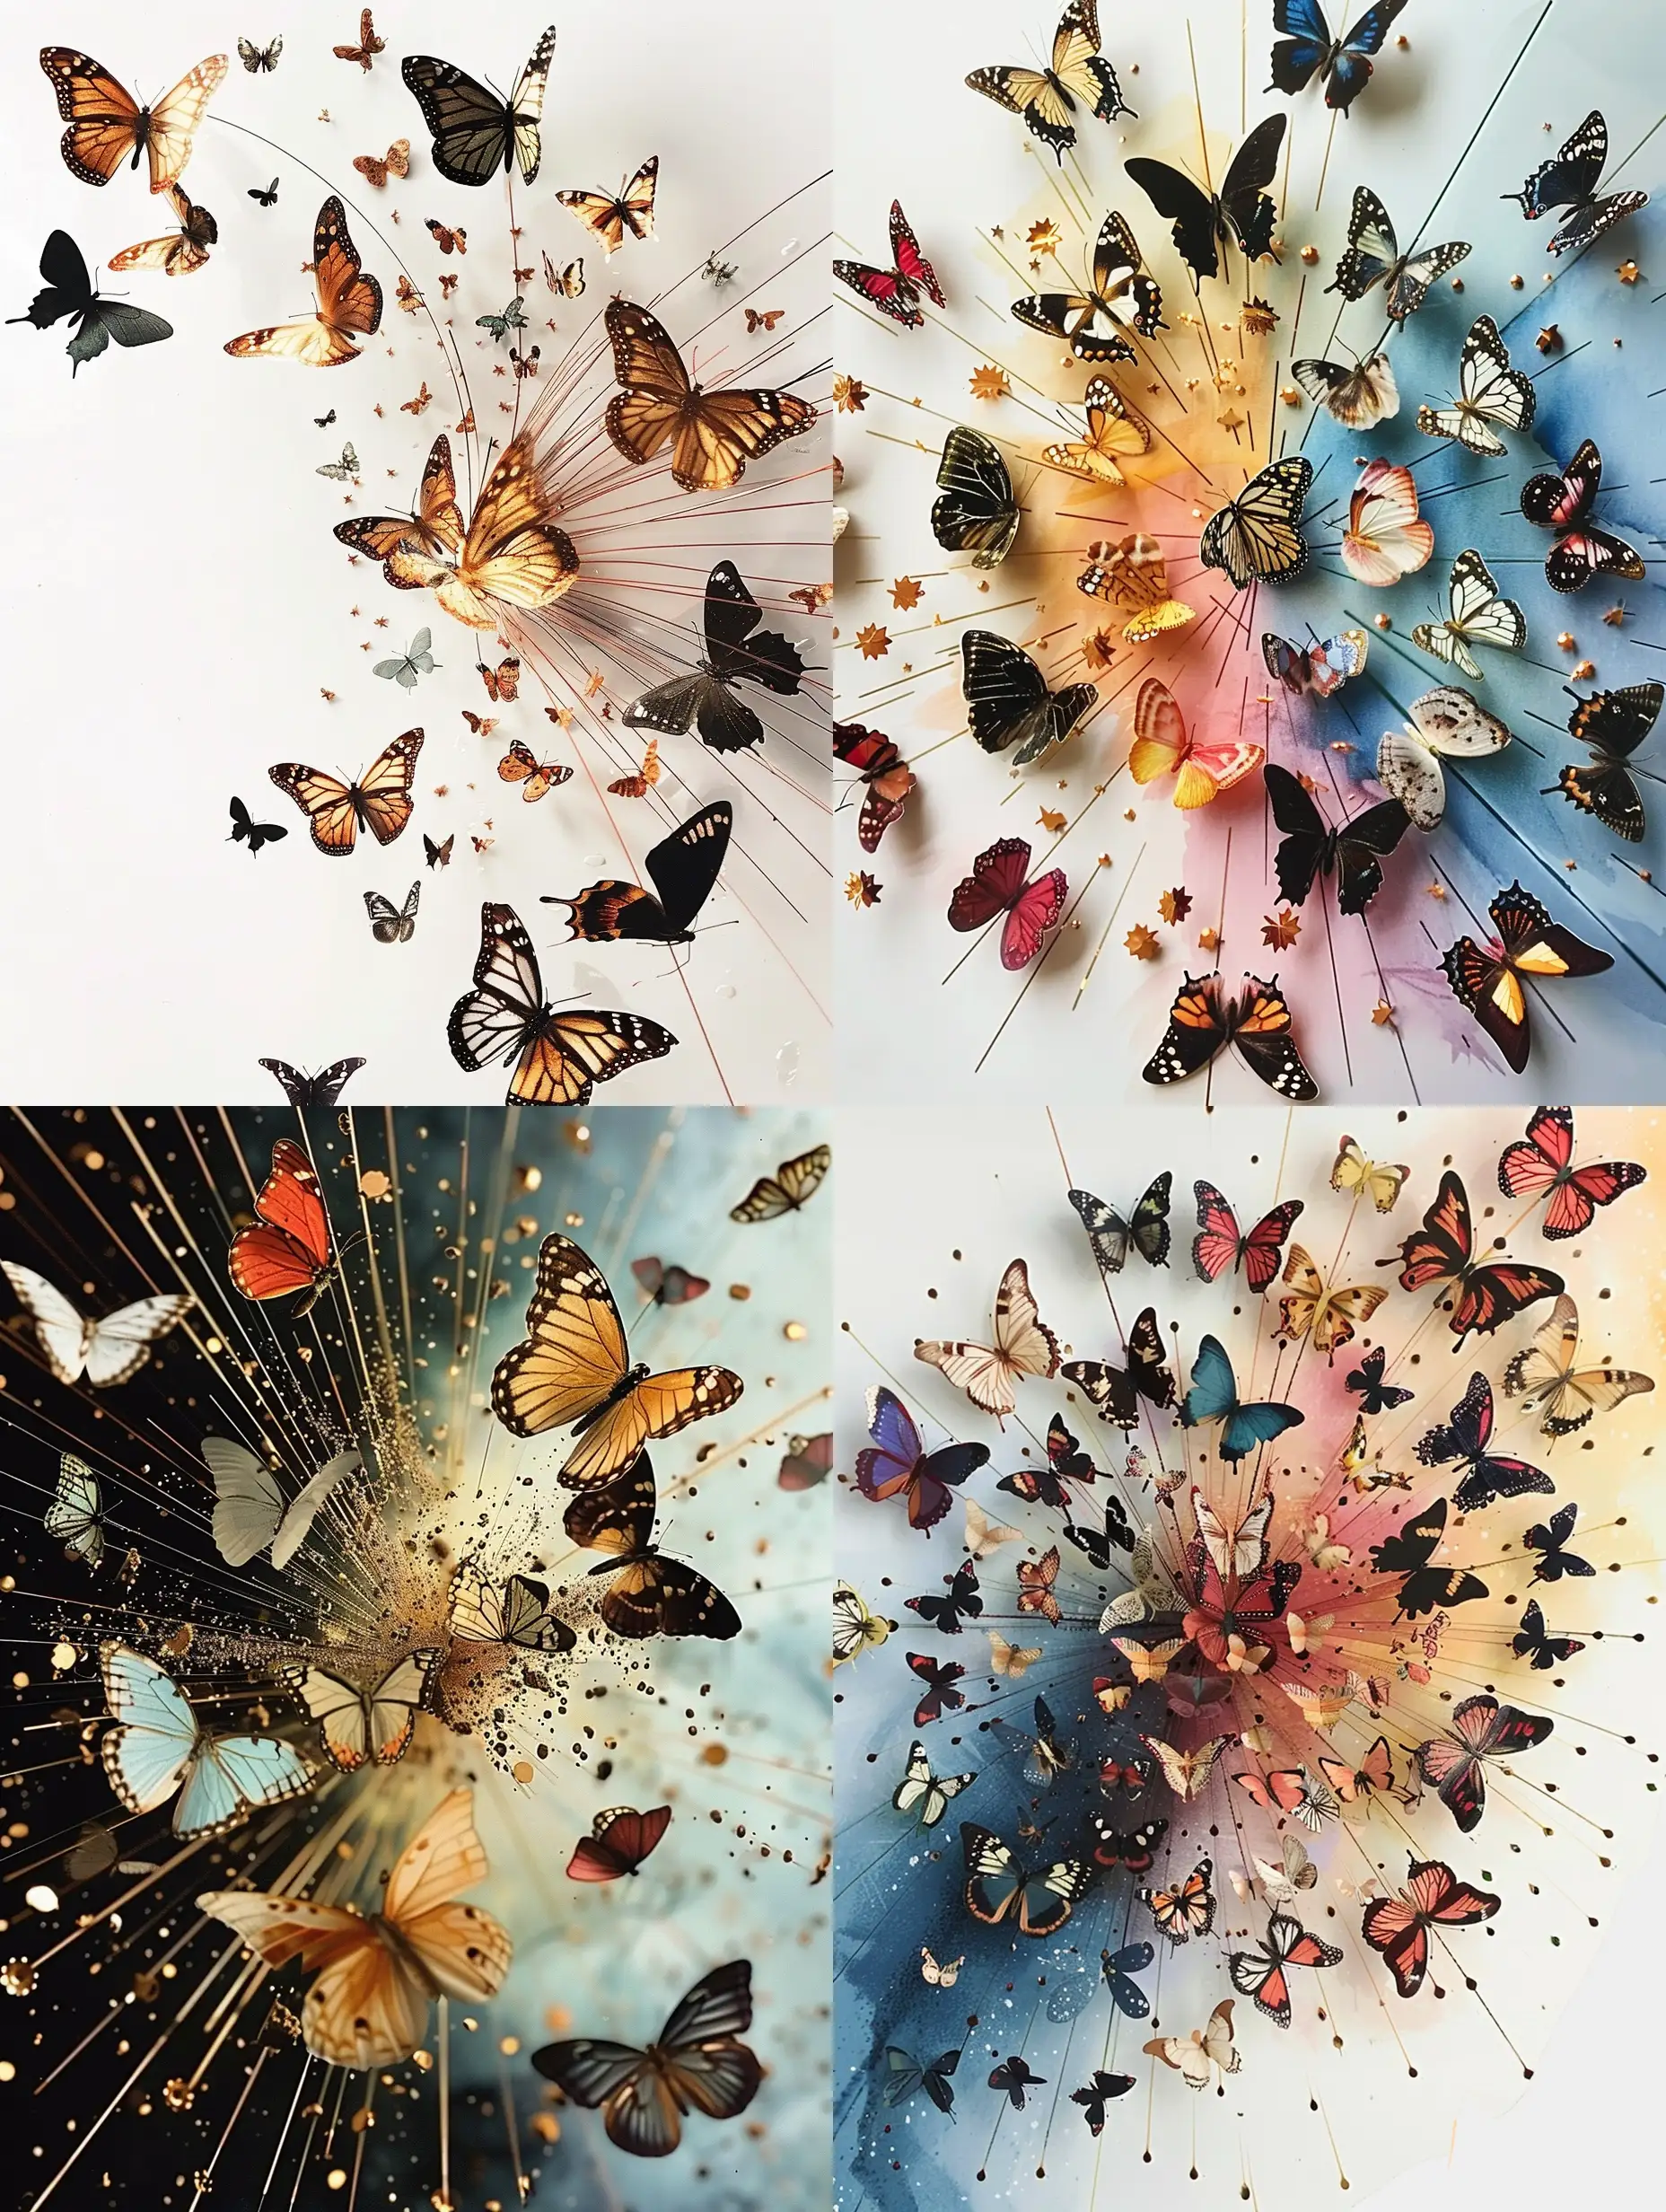 leave this image but remove the butterflies from the center closer to the edge